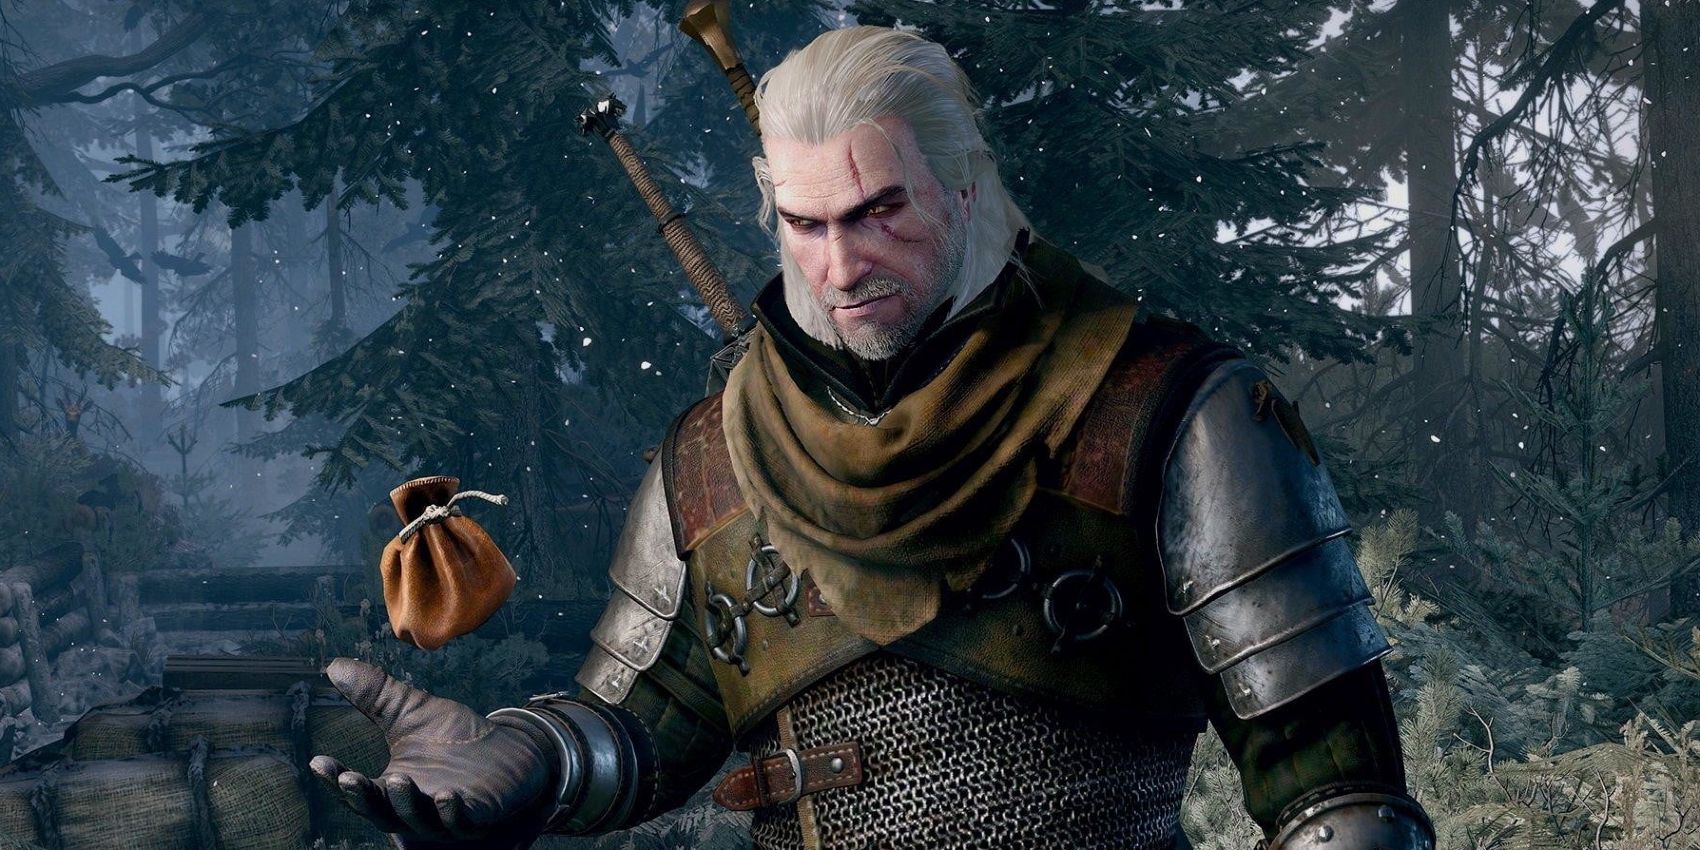 The Witcher 3 Doesn't Let Geralt Evade Taxes | Screen Rant